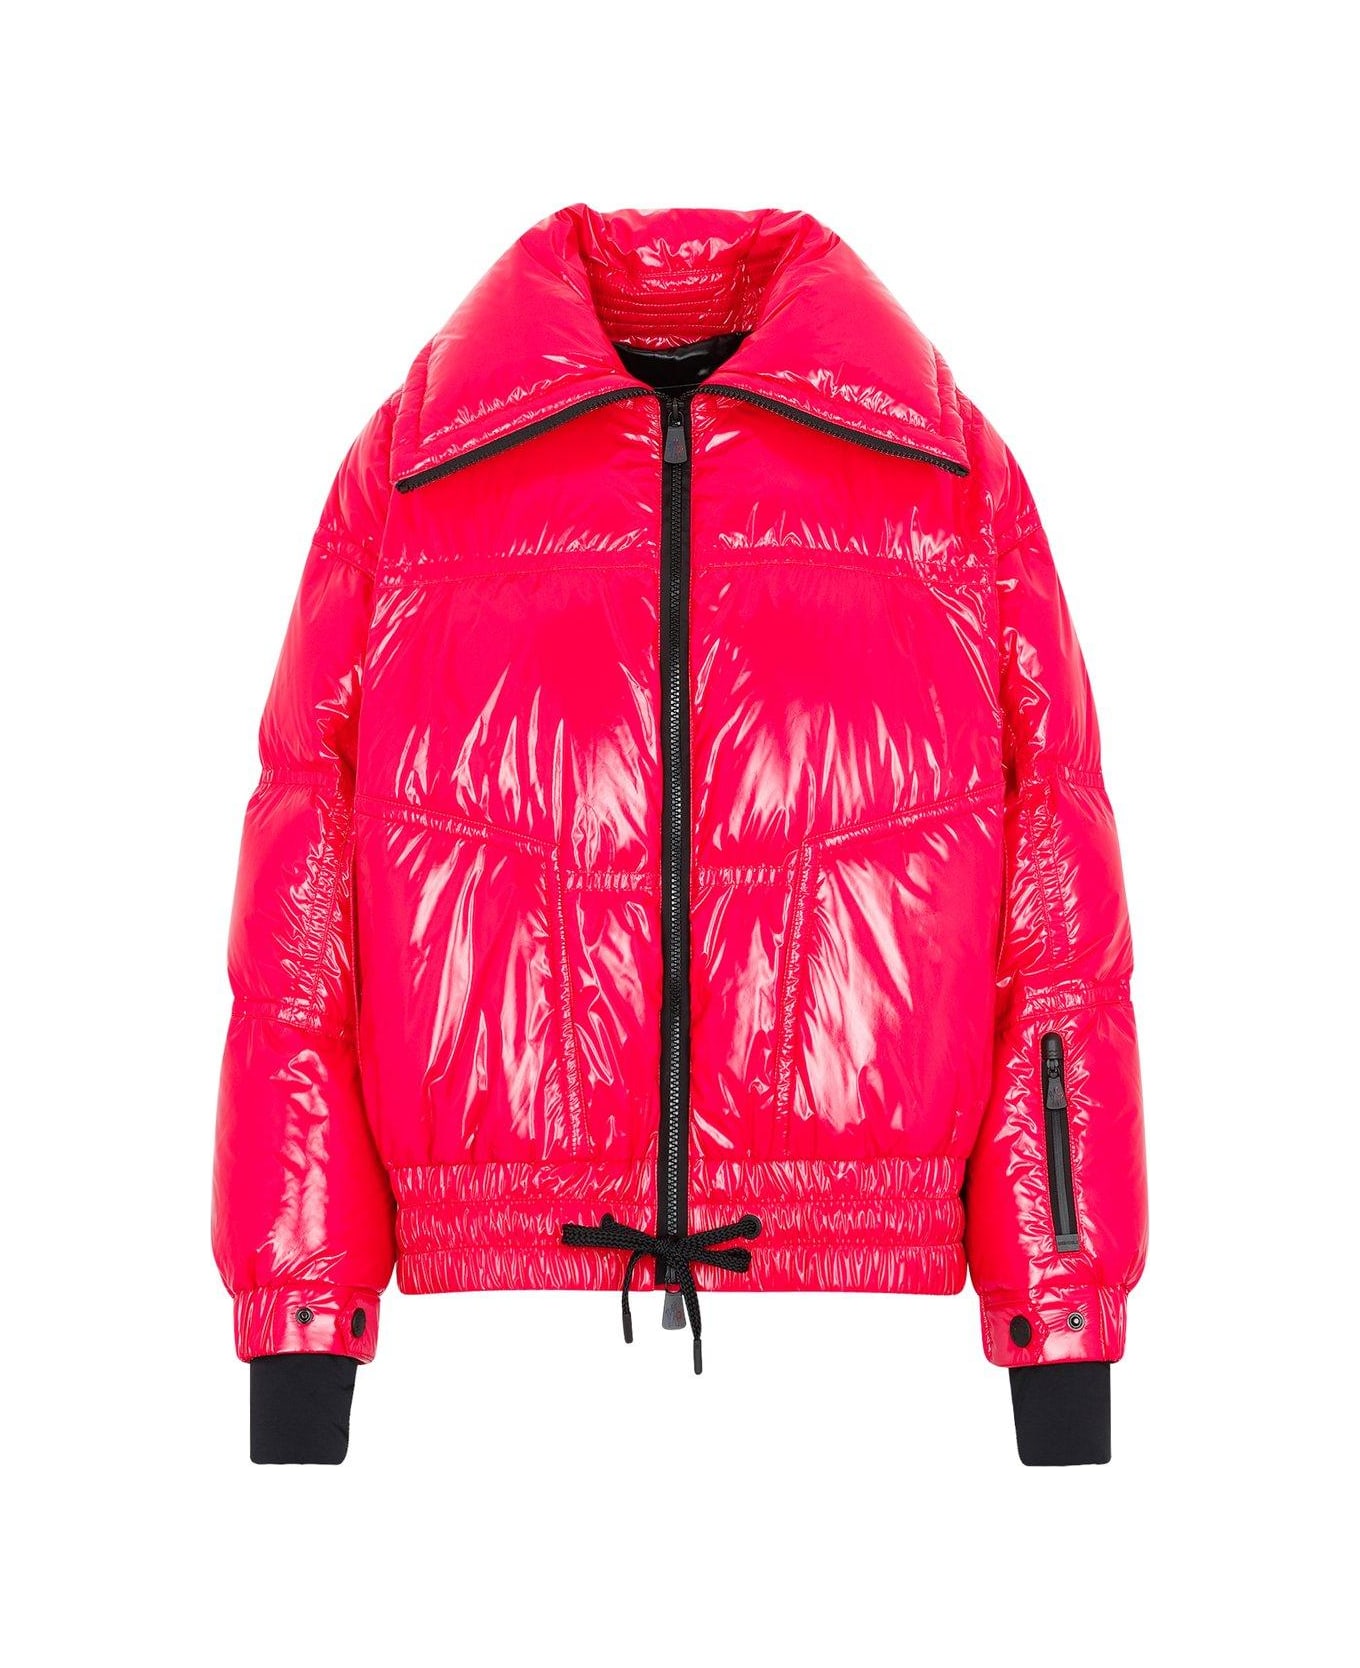 Moncler Grenoble Zip-up Padded Jacket - RED ダウンジャケット